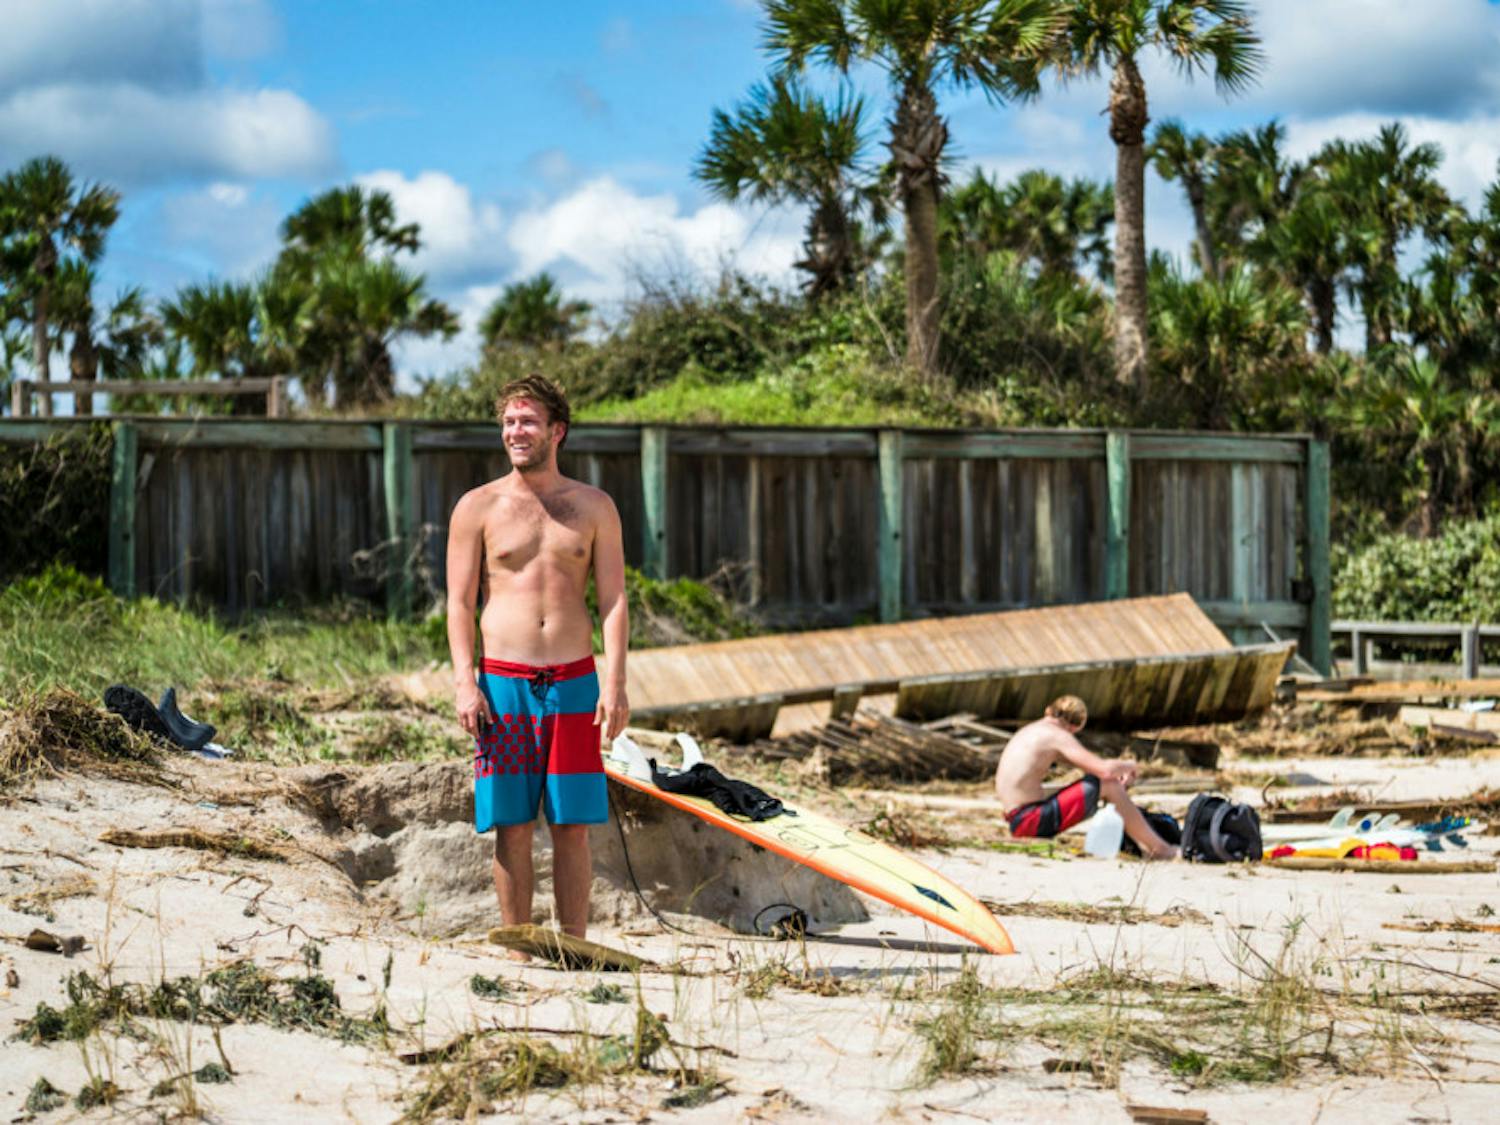 Jake Turner, a 25-year-old Jacksonville local, laughs off a crash after surfing at Ponte Vedra Beach on Saturday.